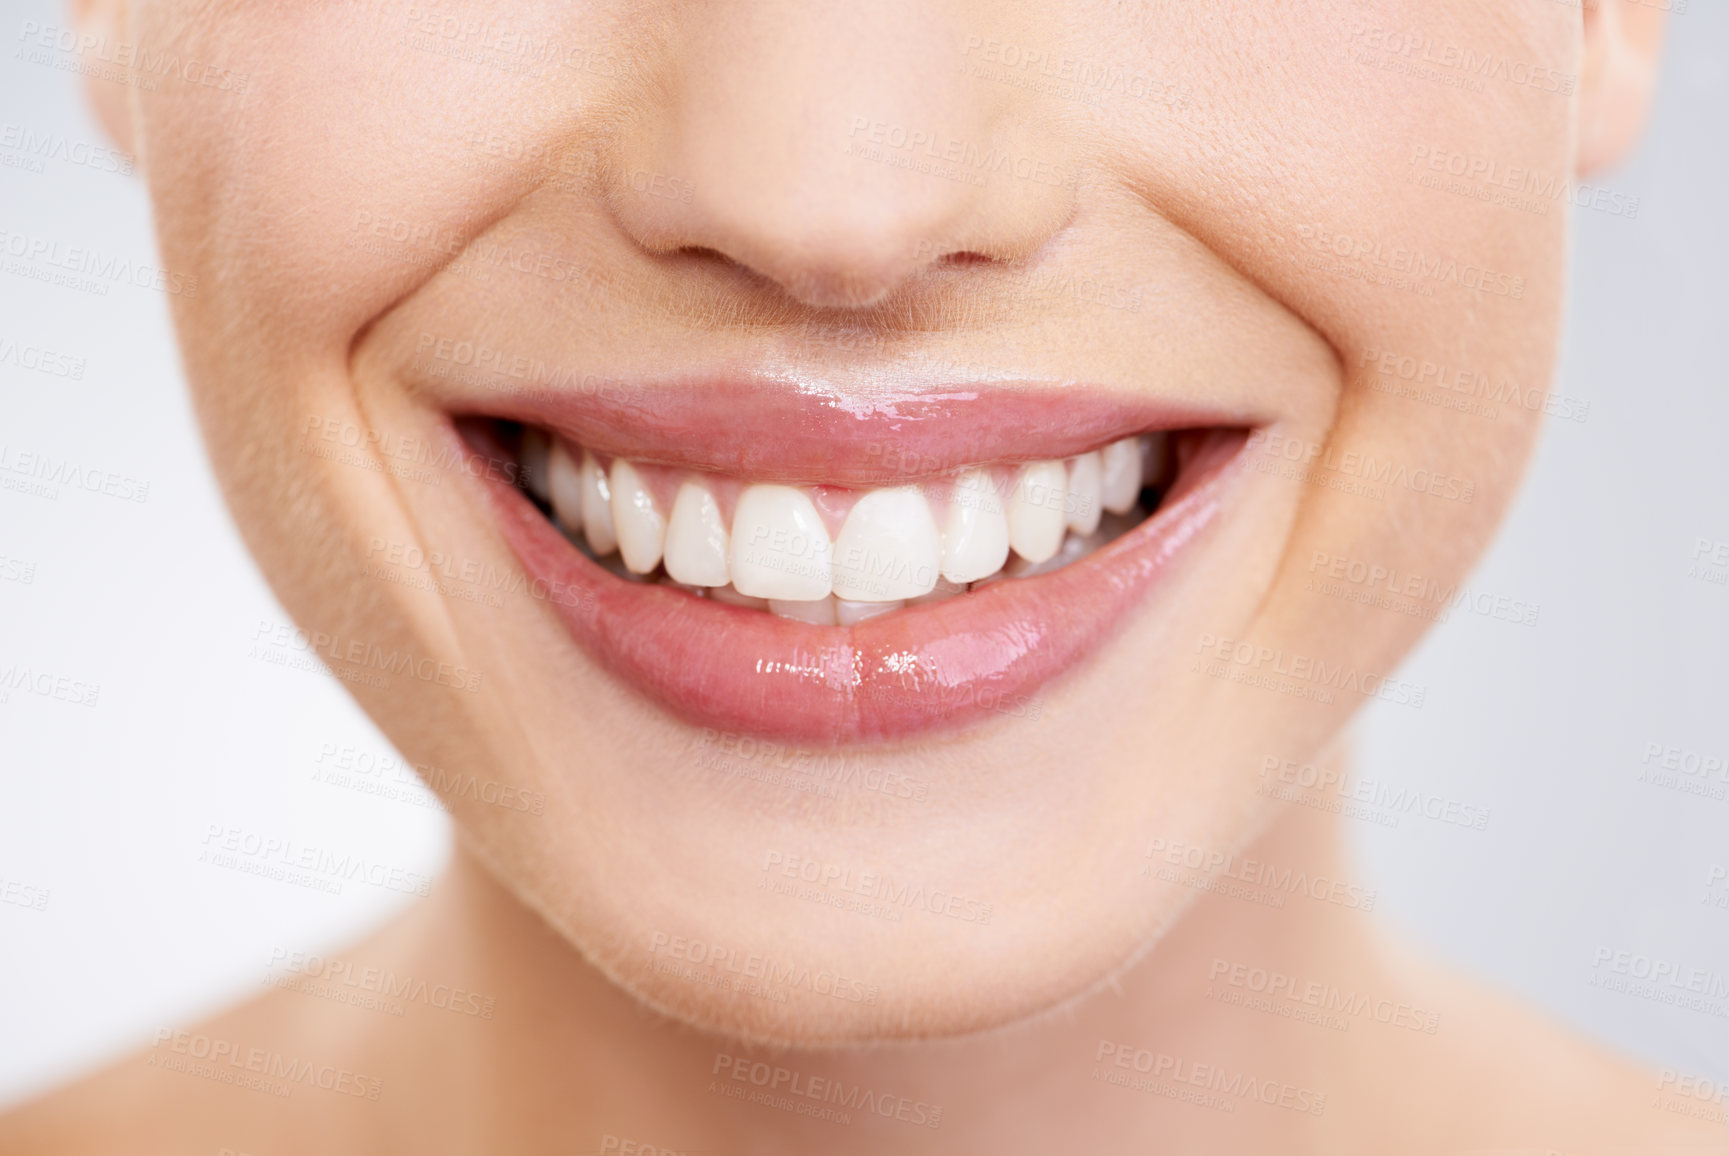 Buy stock photo Macro image of a stunning woman's smile - Pearly white teeth